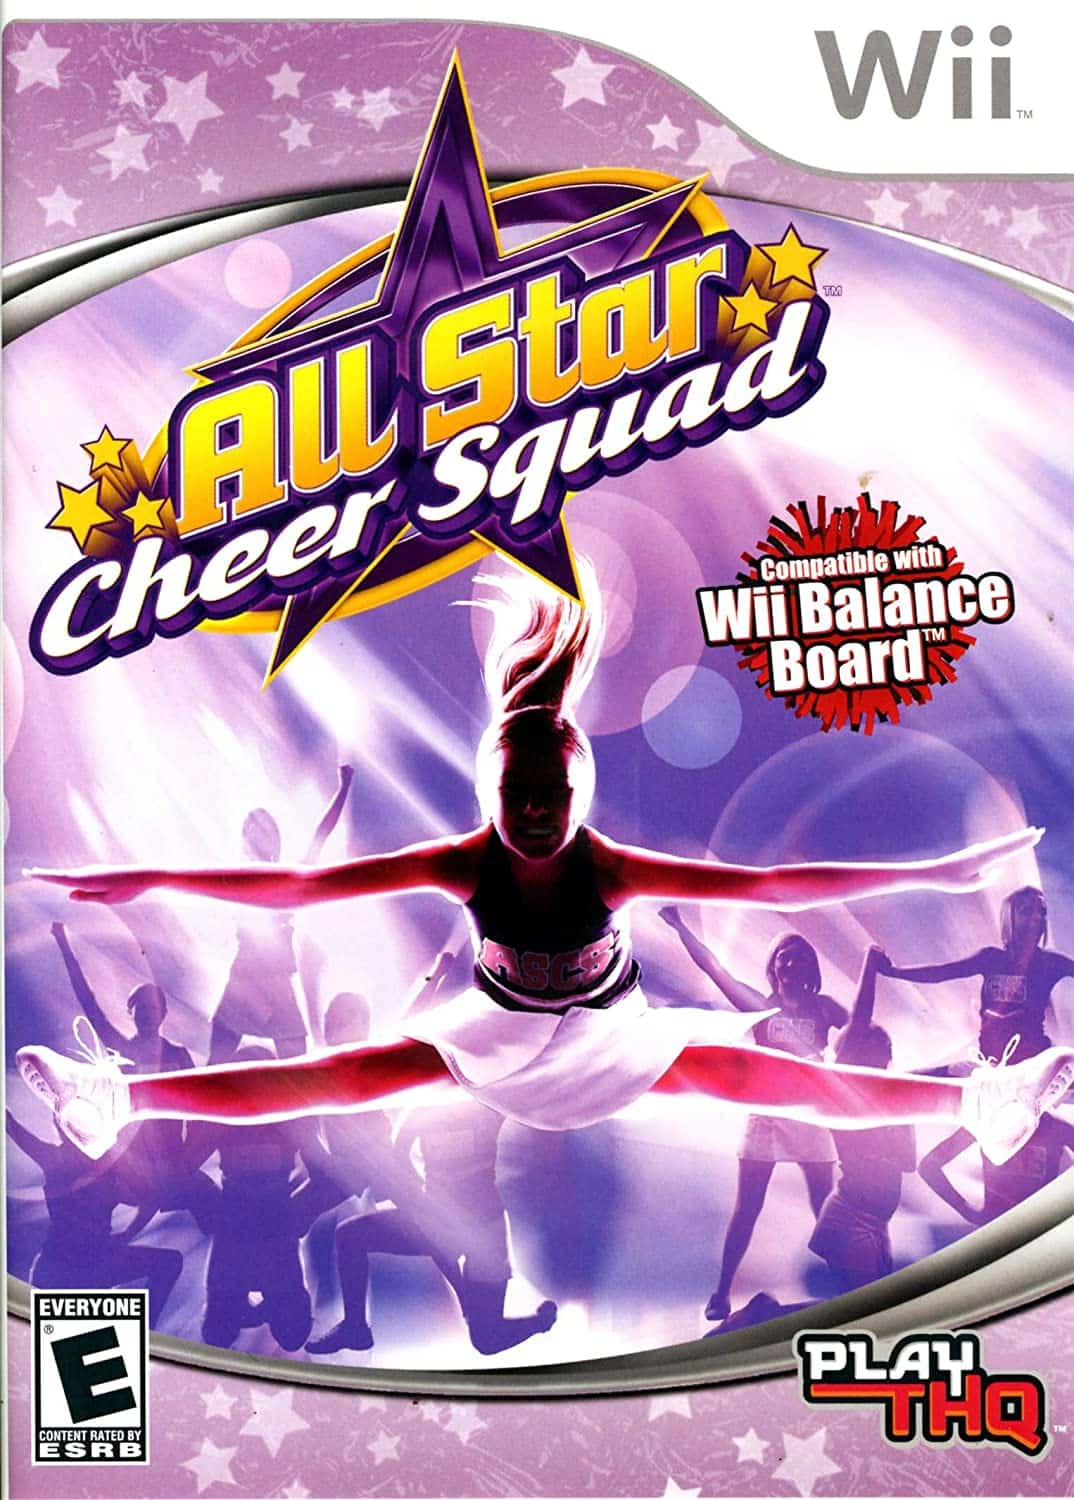 All Star Cheer Squad player count stats